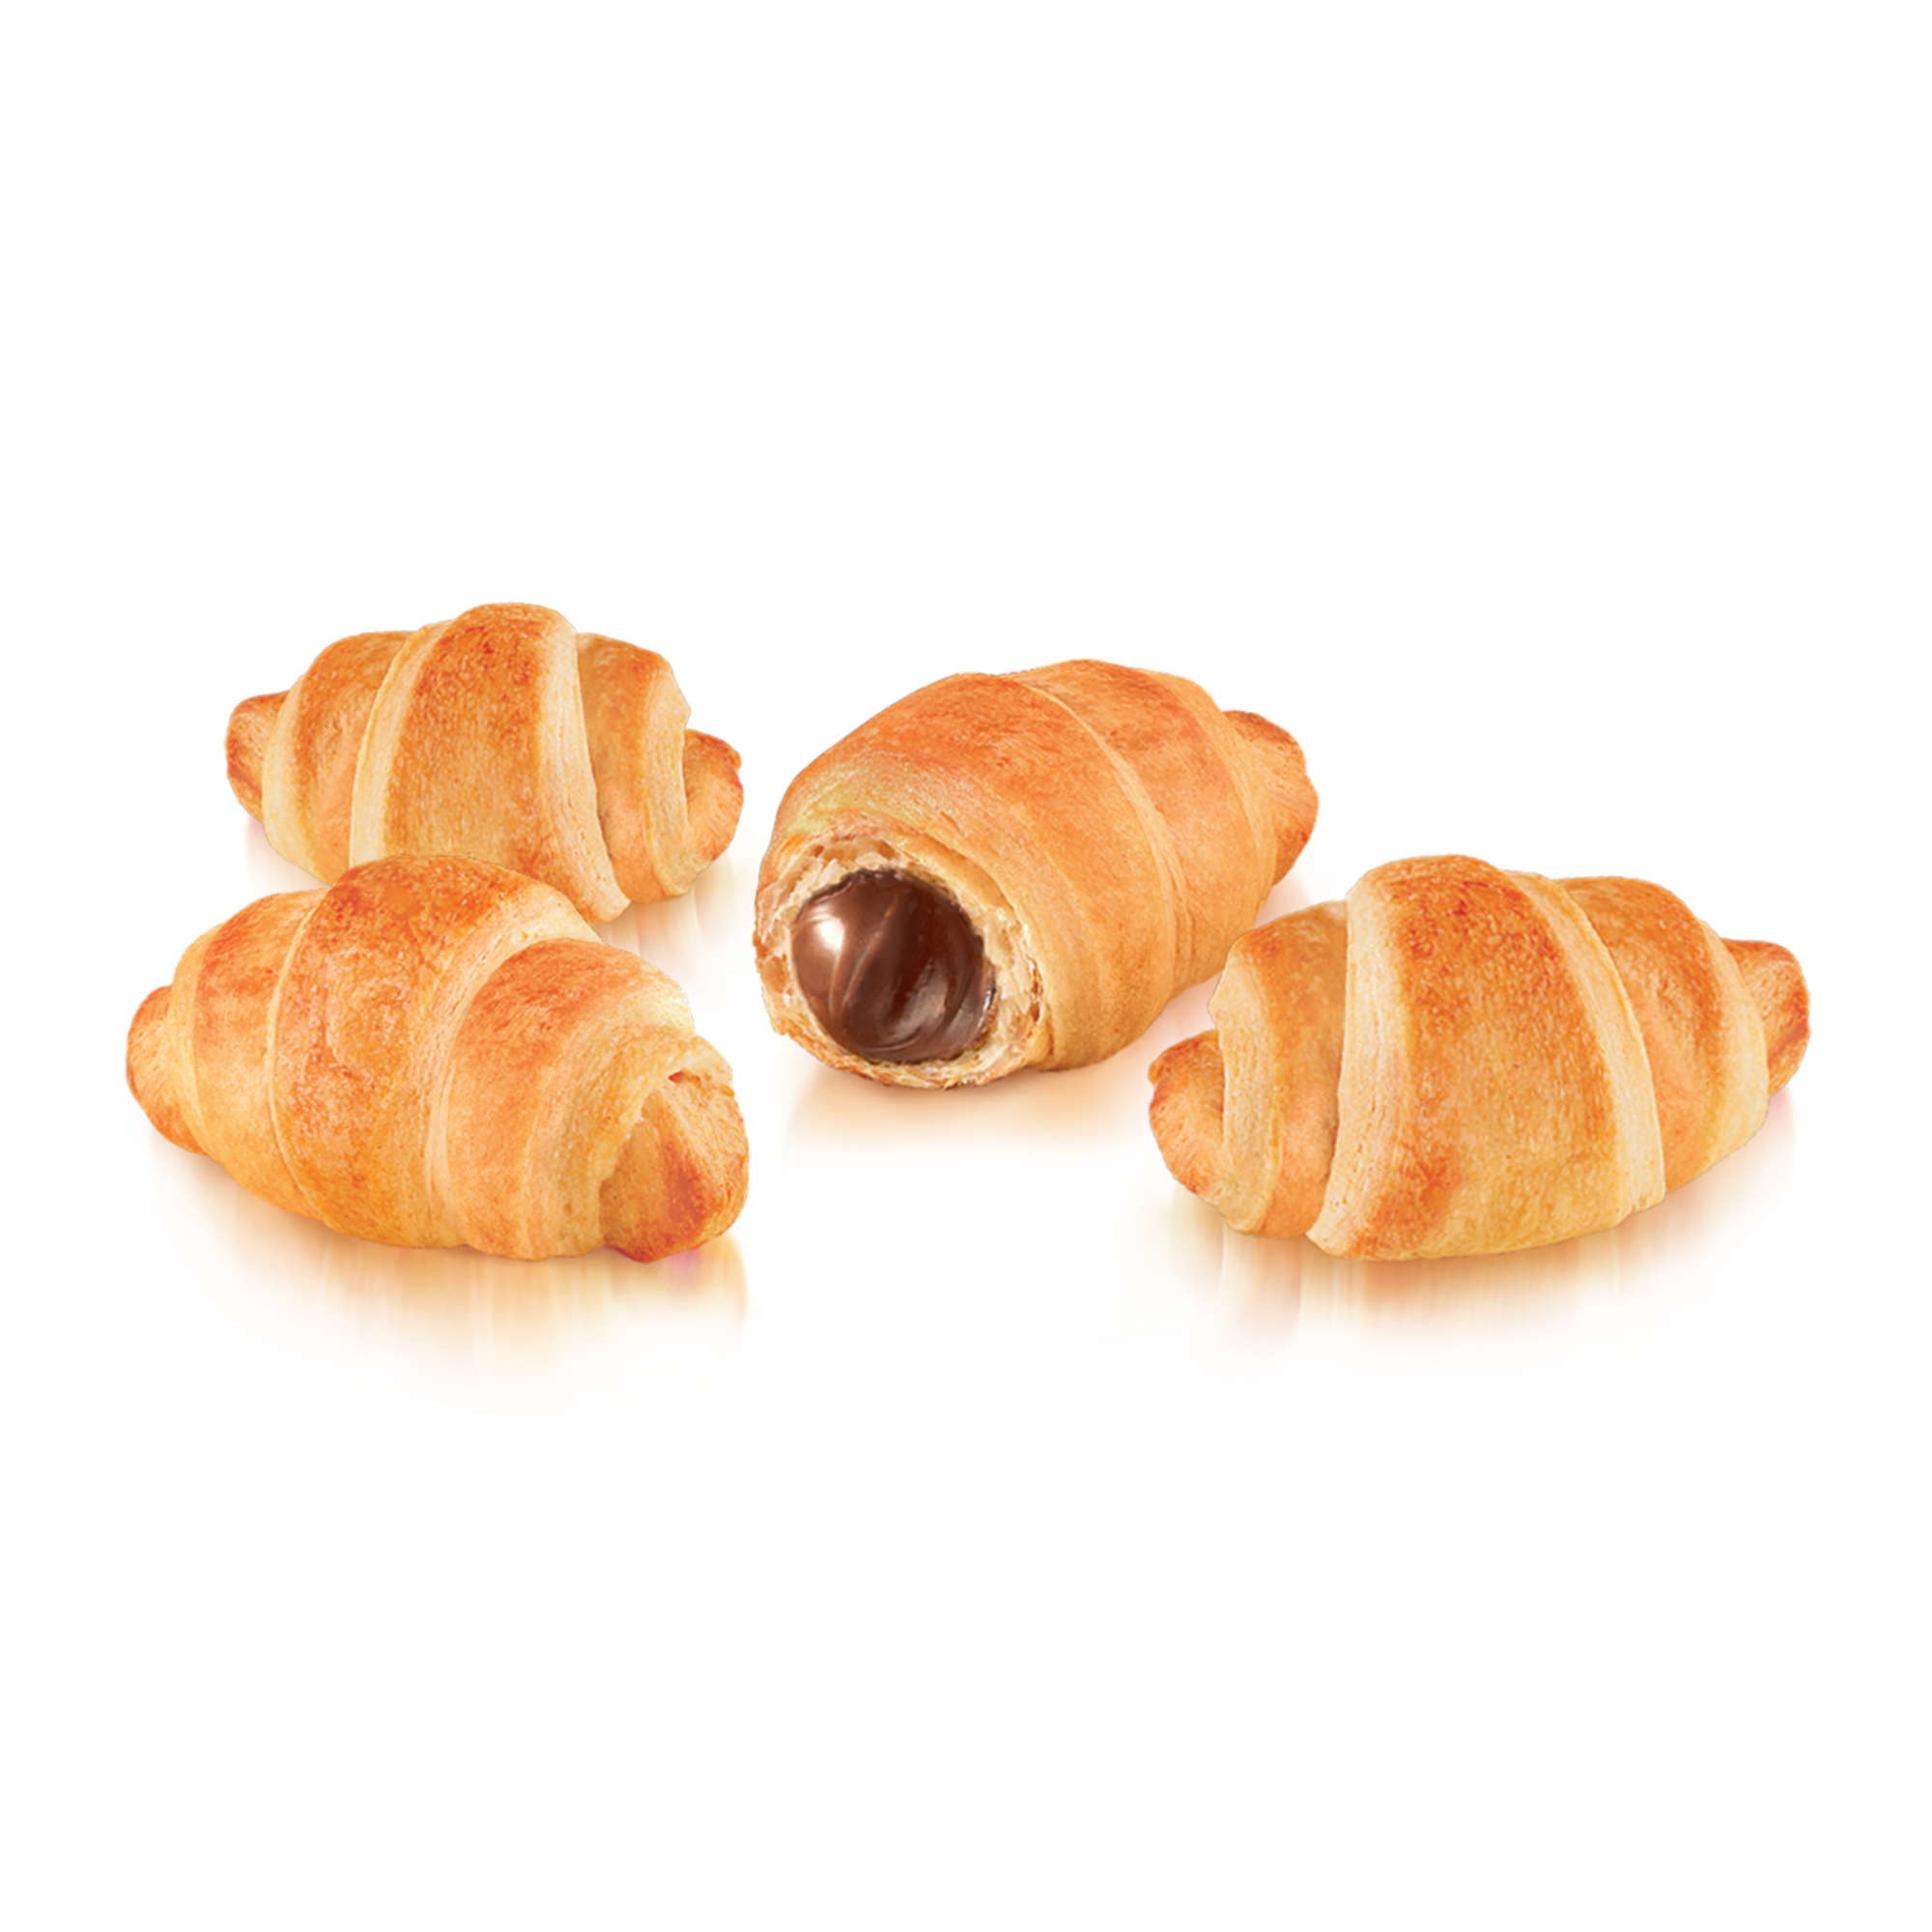 chocolate mini croissants pack of 10 or 30